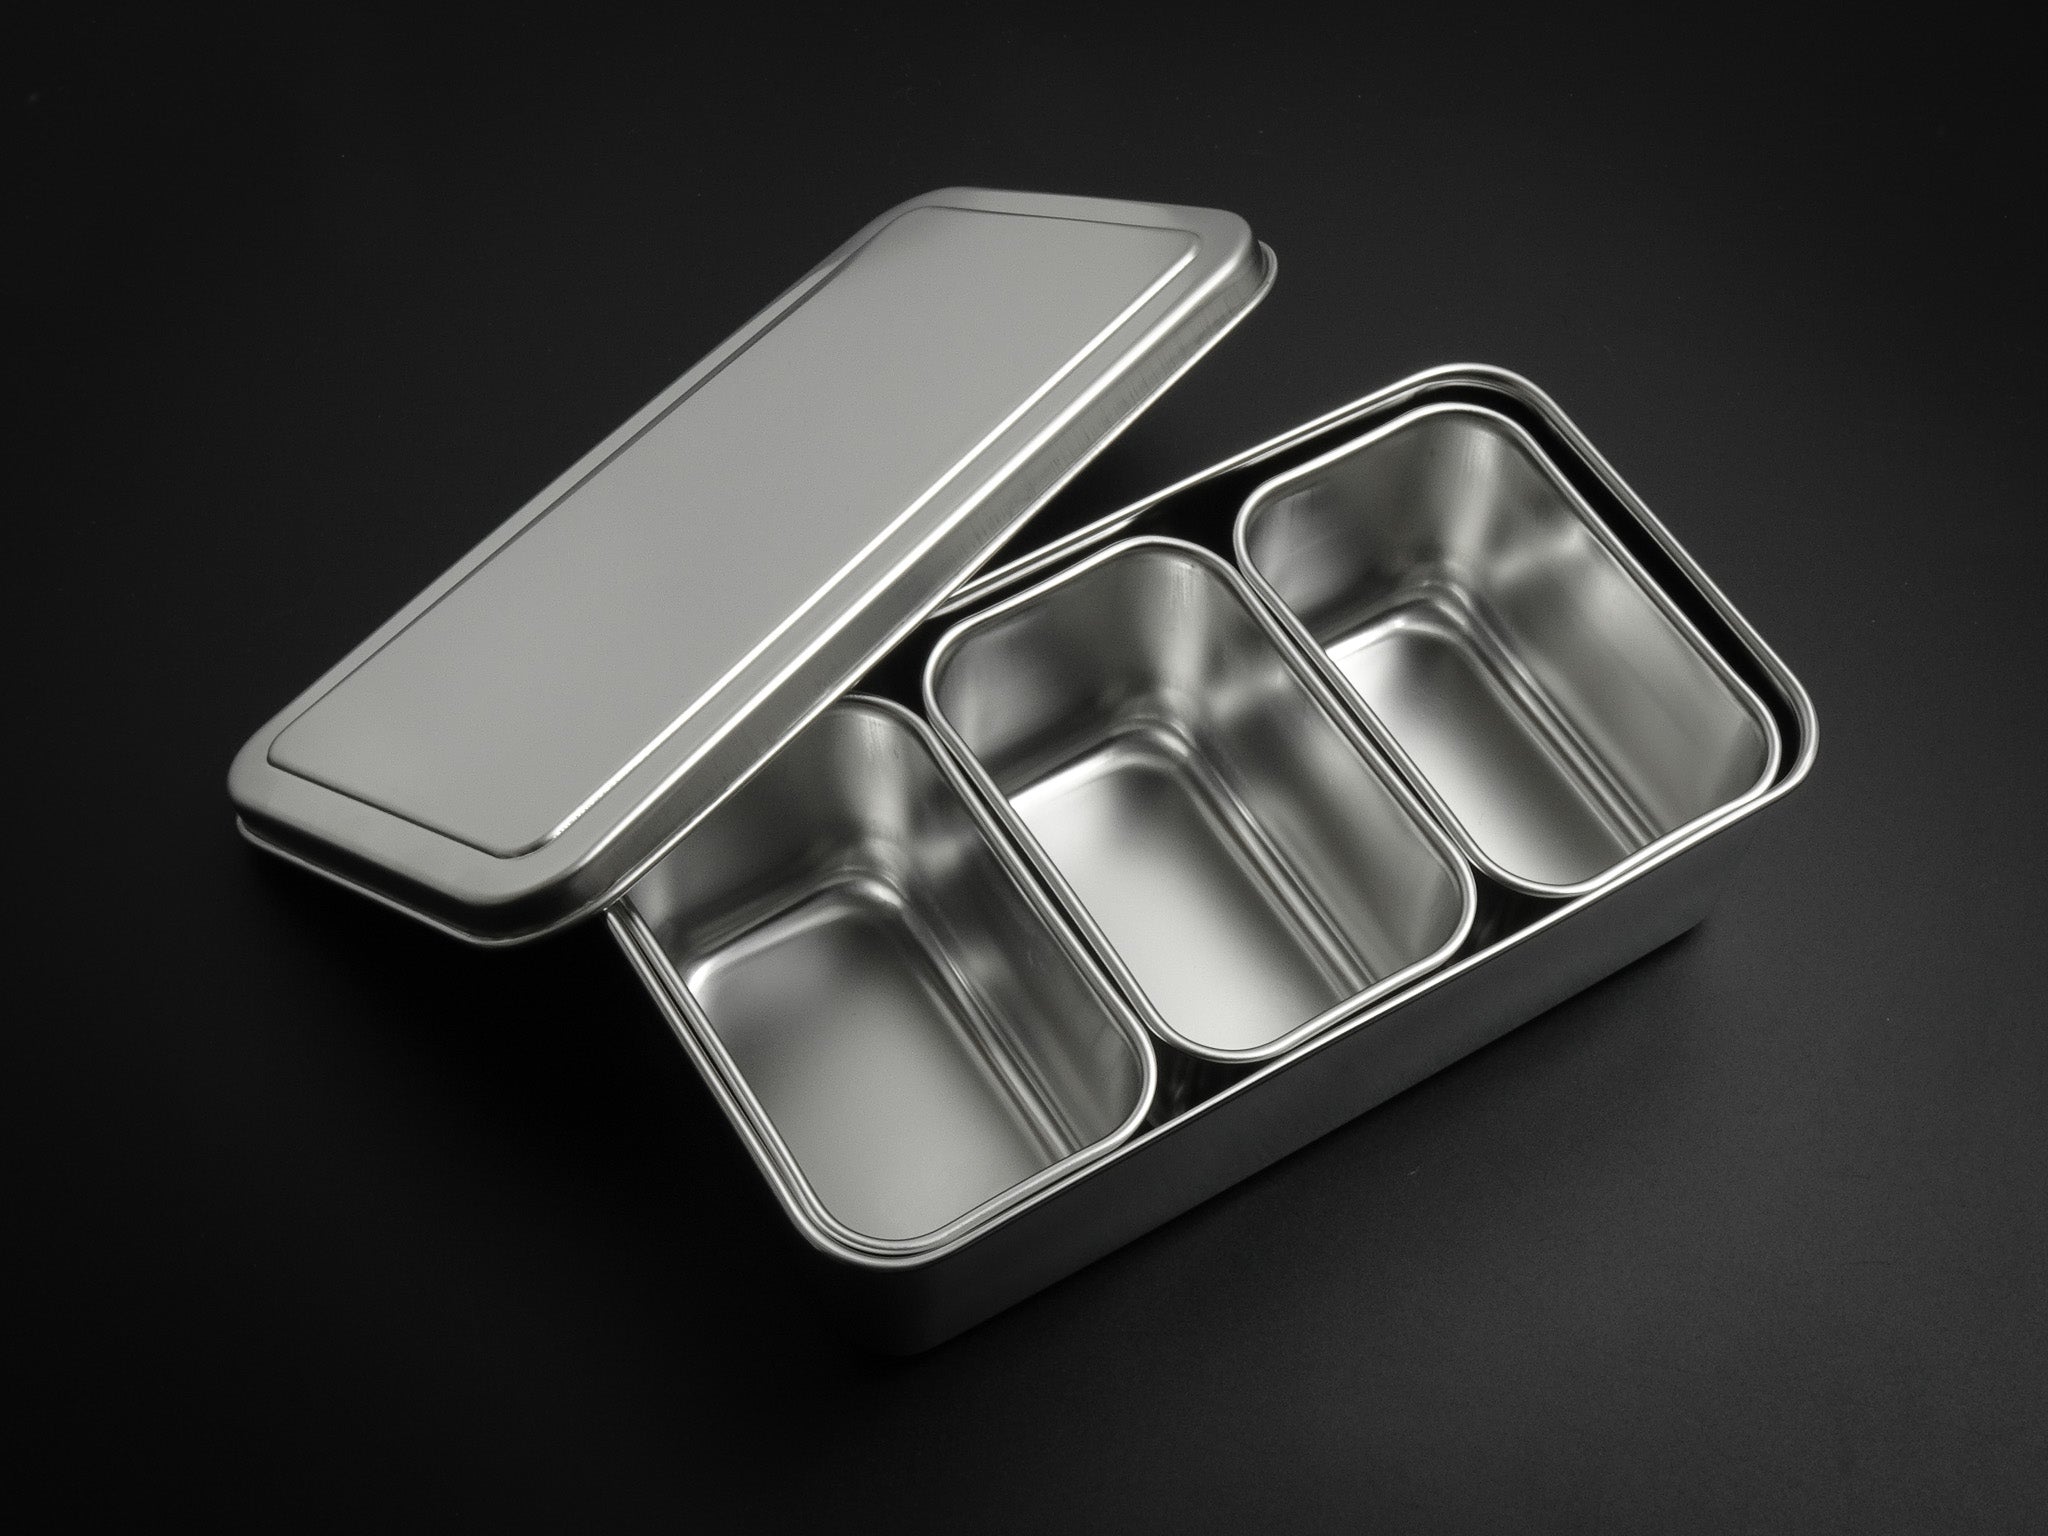 Stainless Yakumi Pan/Seasoning Container w/4 Compartments